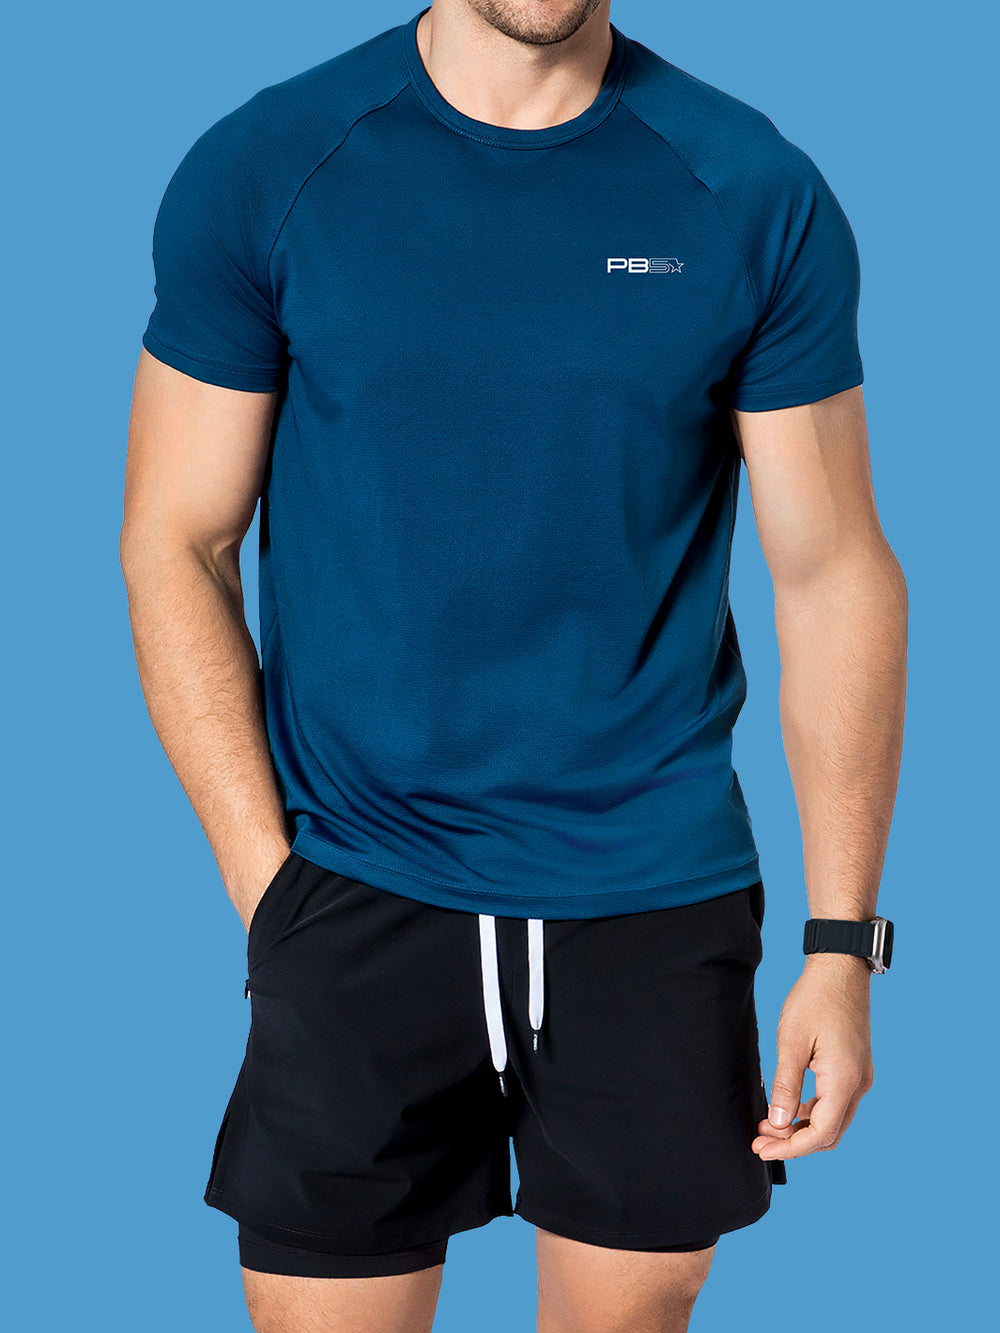 Model wearing a men's PB5star Core Performance Tee in astral blue, designed for optimal movement in pickleball.